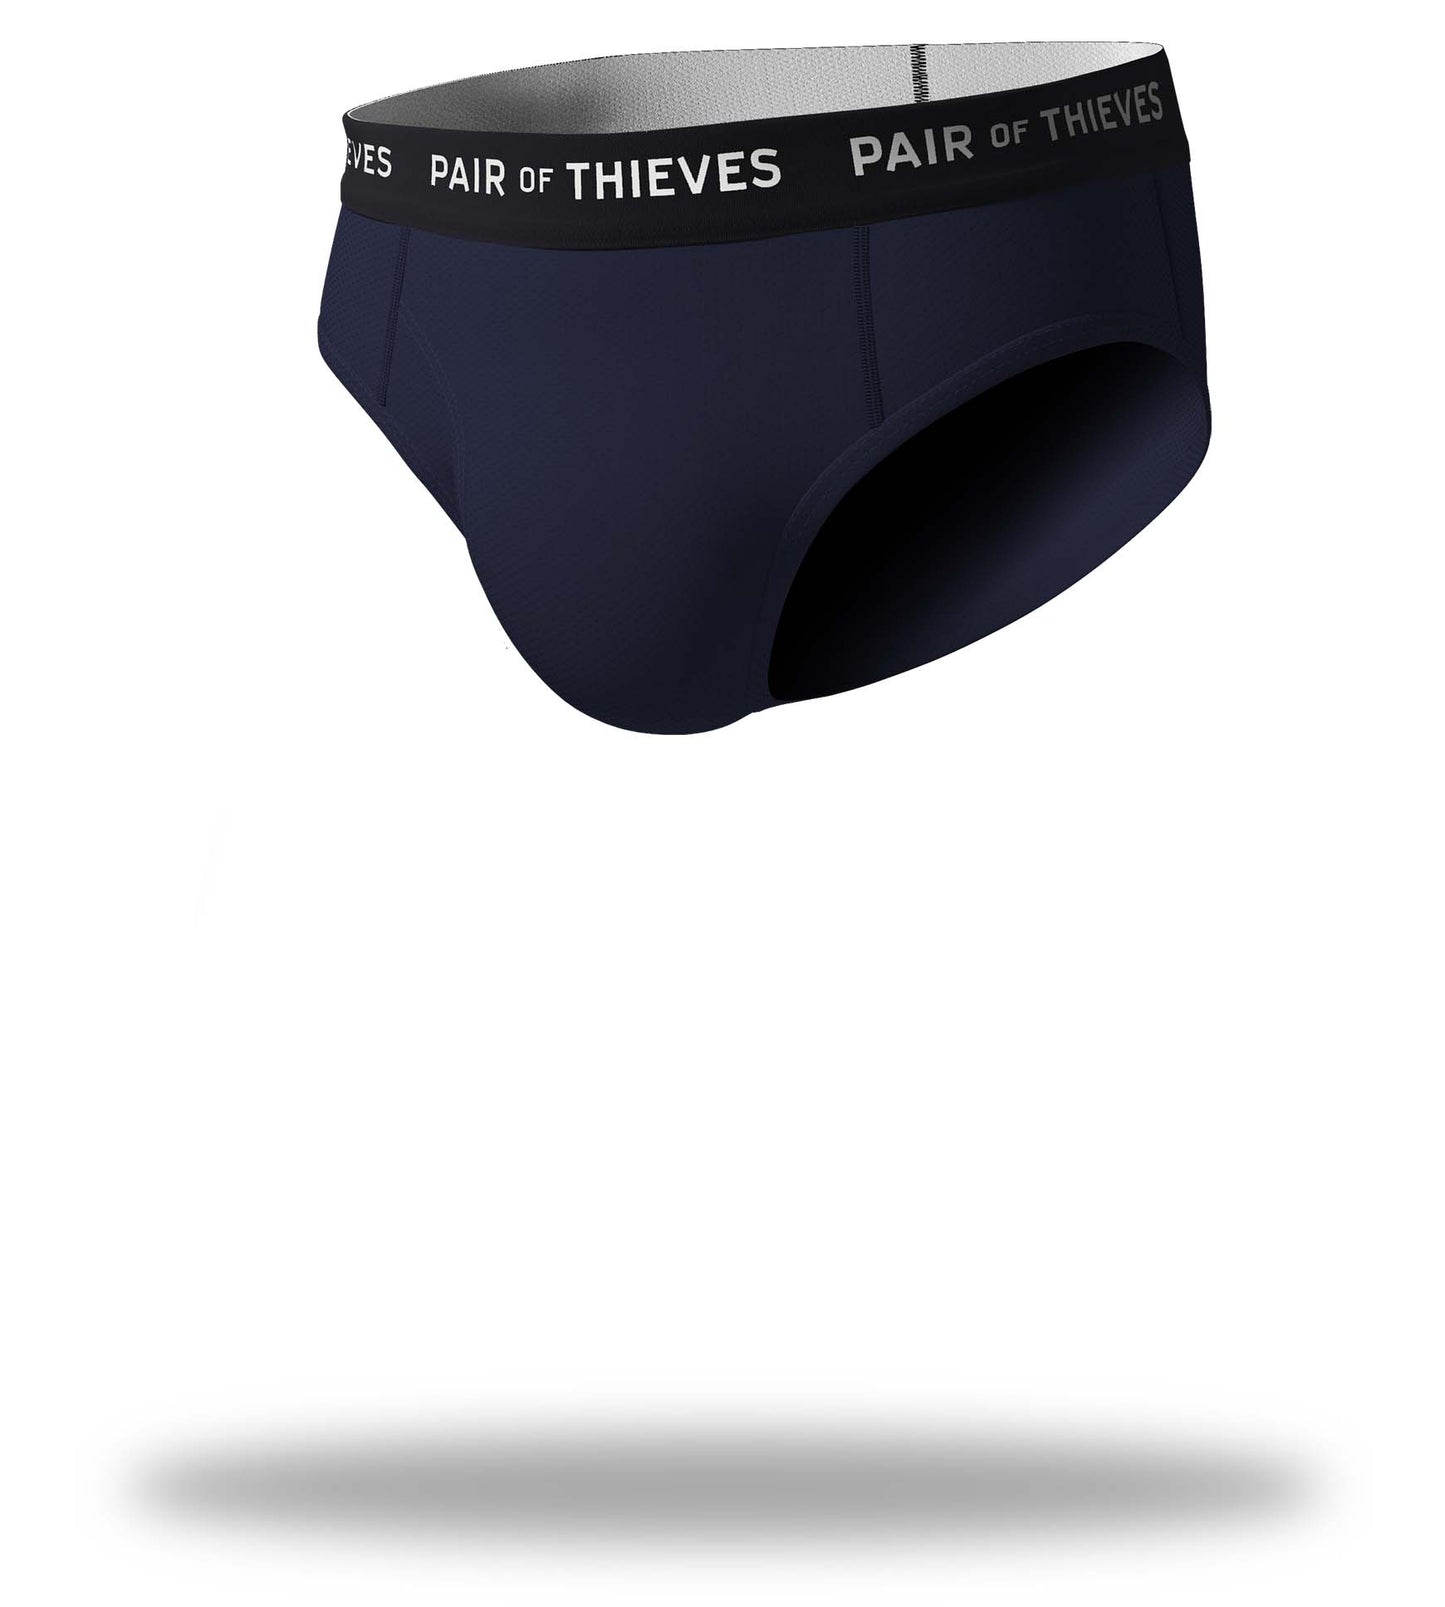 superfit blue brief, navy with white logo on navy waistband